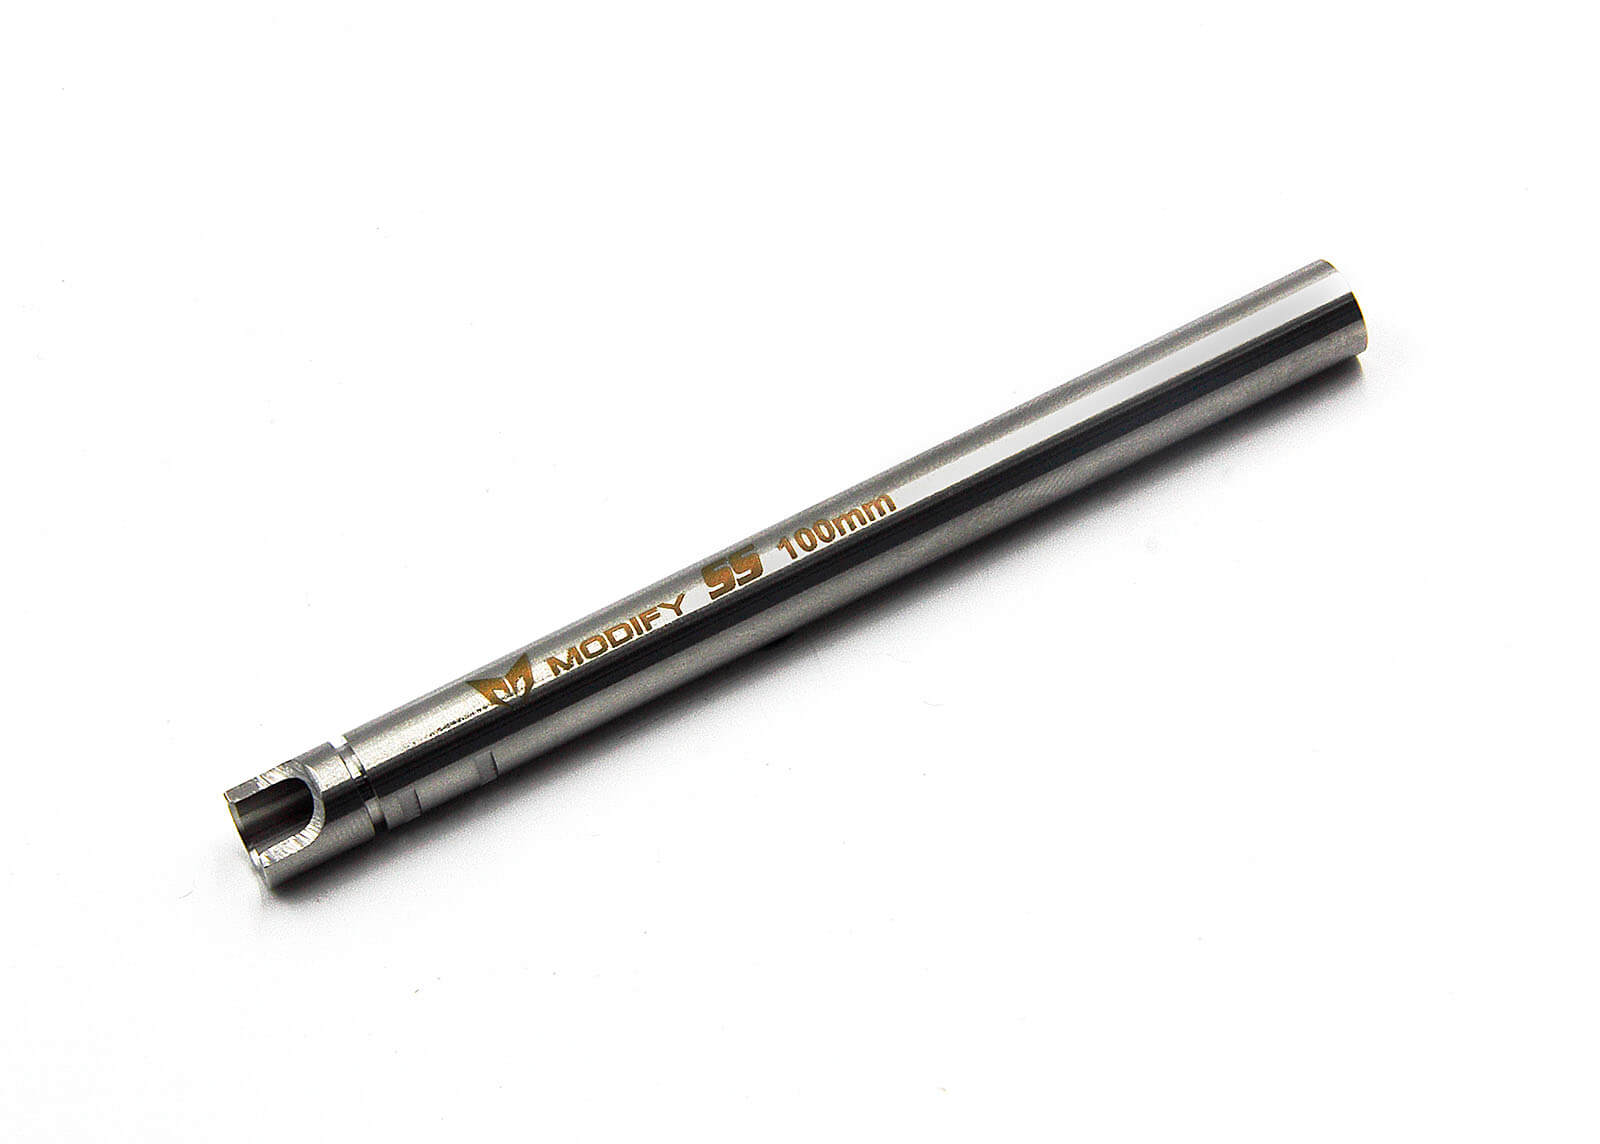 Stainless Steel 6.03mm Precision GBB Inner Barrel 100mm - Modify Airsoft Parts